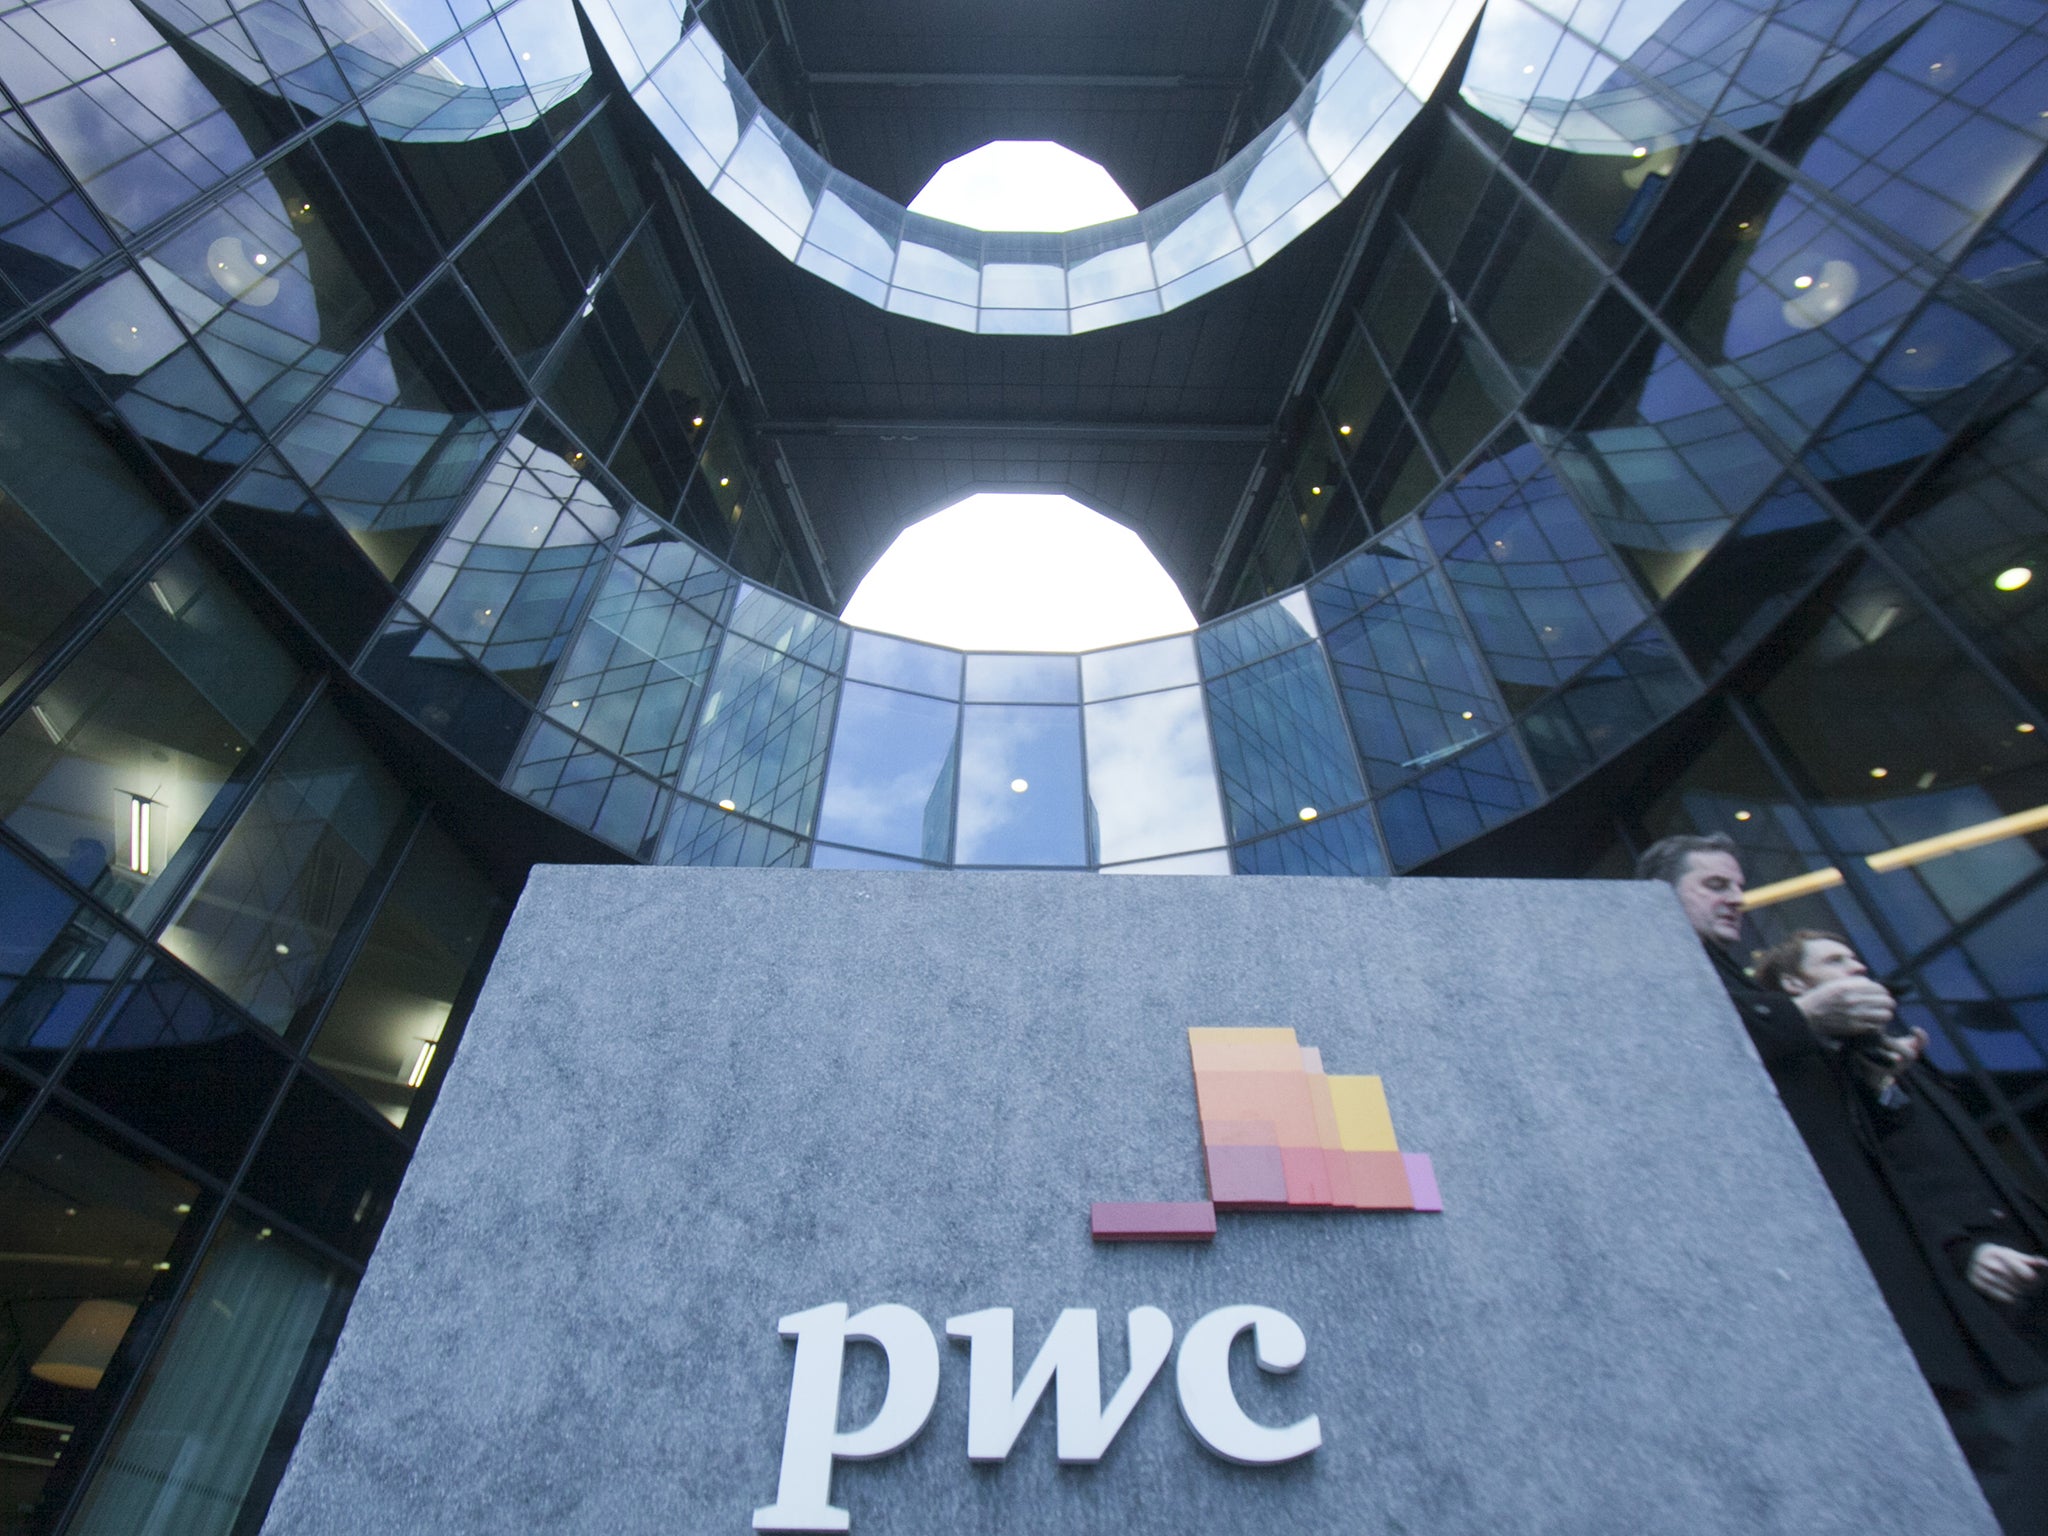 PWC voluntarily reported their numbers – will others follow suit?